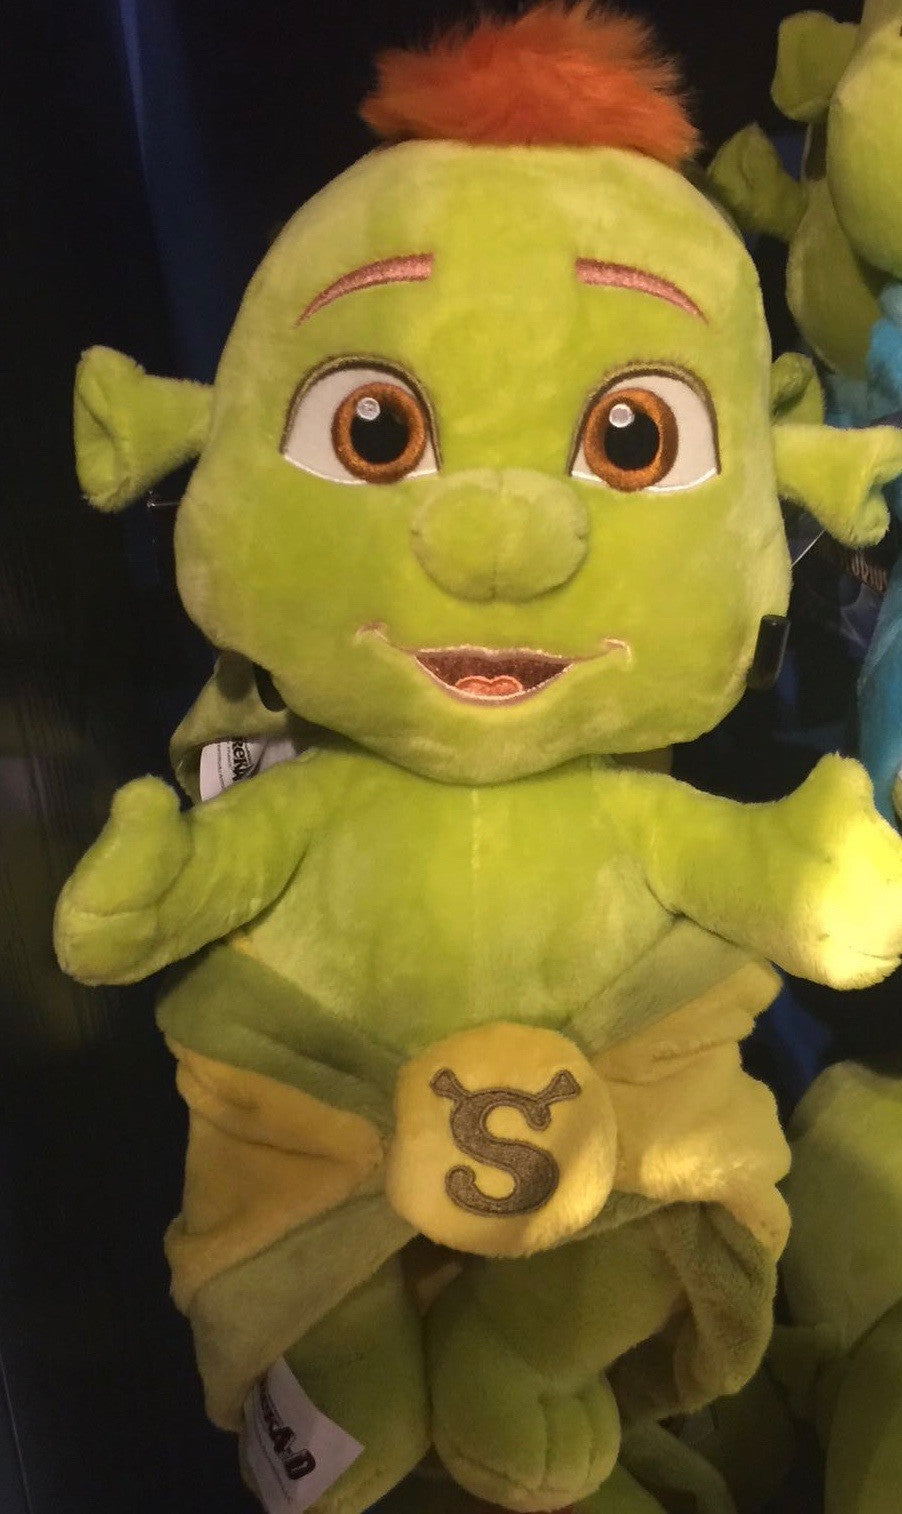 Universal Studios Shrek 4-D Baby Boy in Yellow Blanket Plush New With Tags